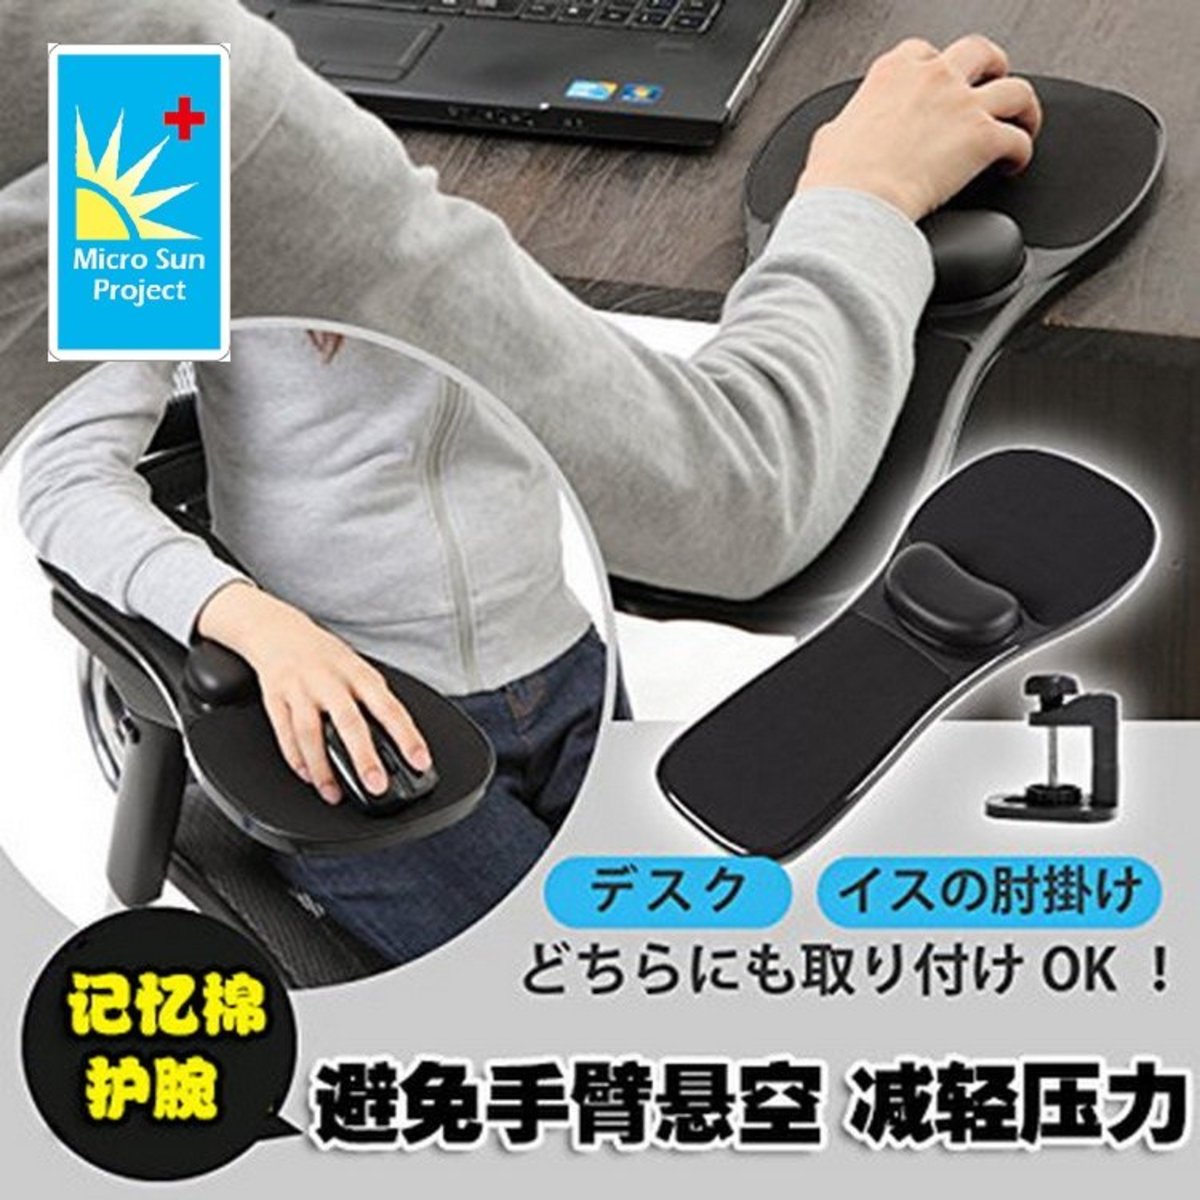 Micro Sun - Computer wrist support pad (table and chair dual purpose)